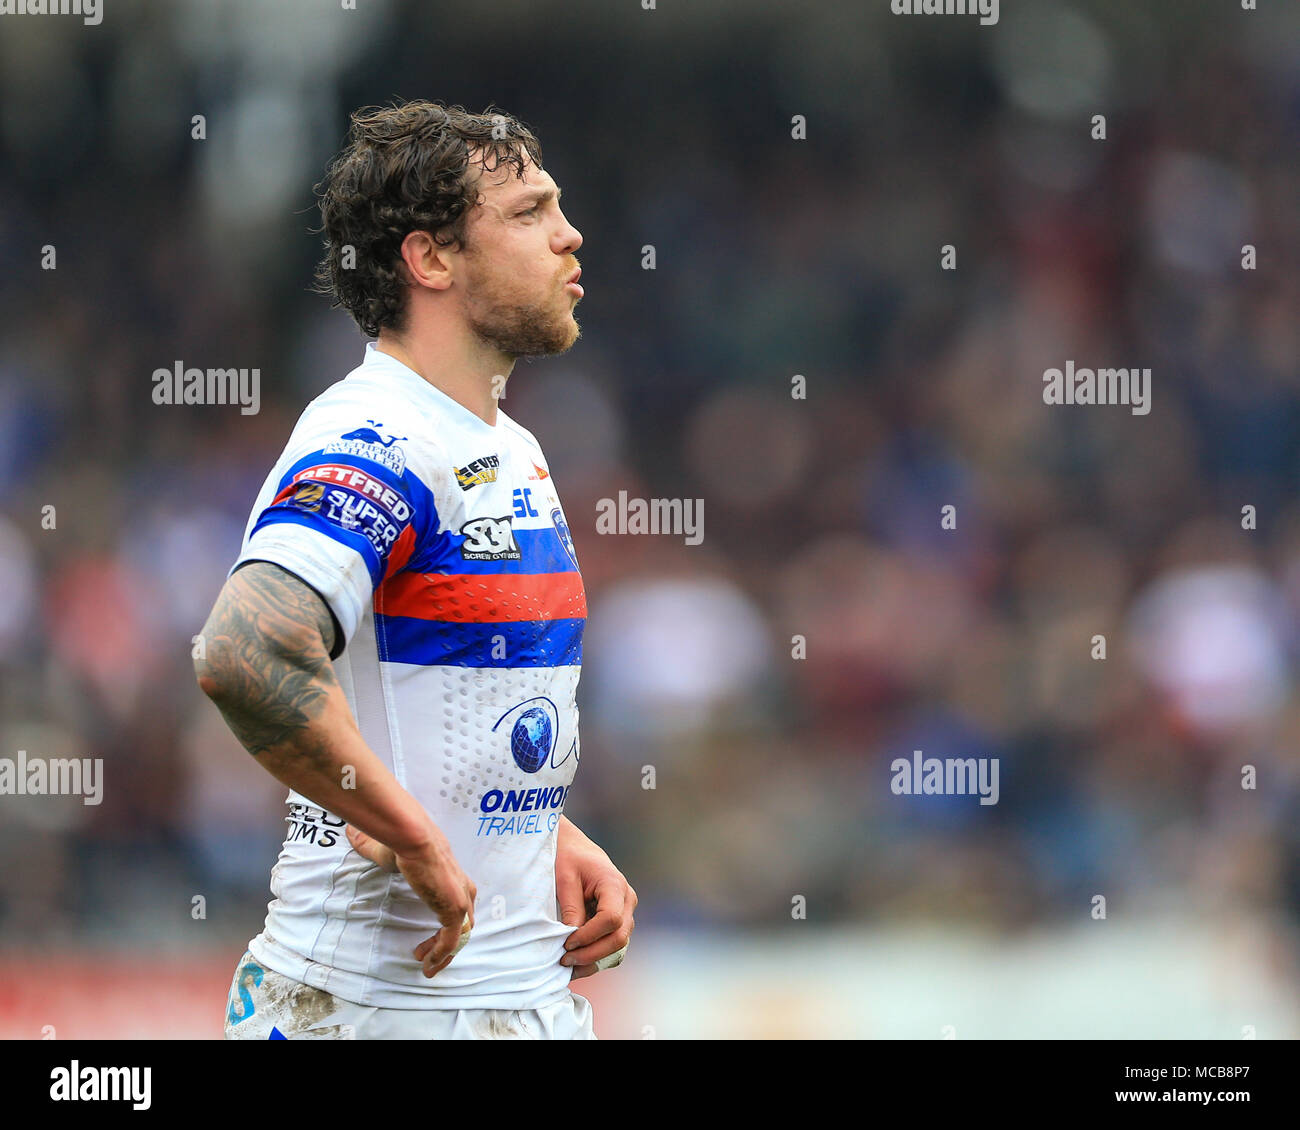 8 avril 2018, Beaumont stade juridique, Wakefield, Angleterre ; Betfred Super League rugby, Wakefield Trinity v St Helens ; Scott Habitat Expo de Wakefield Trinity Credit : Nouvelles Images/Alamy Live News Banque D'Images